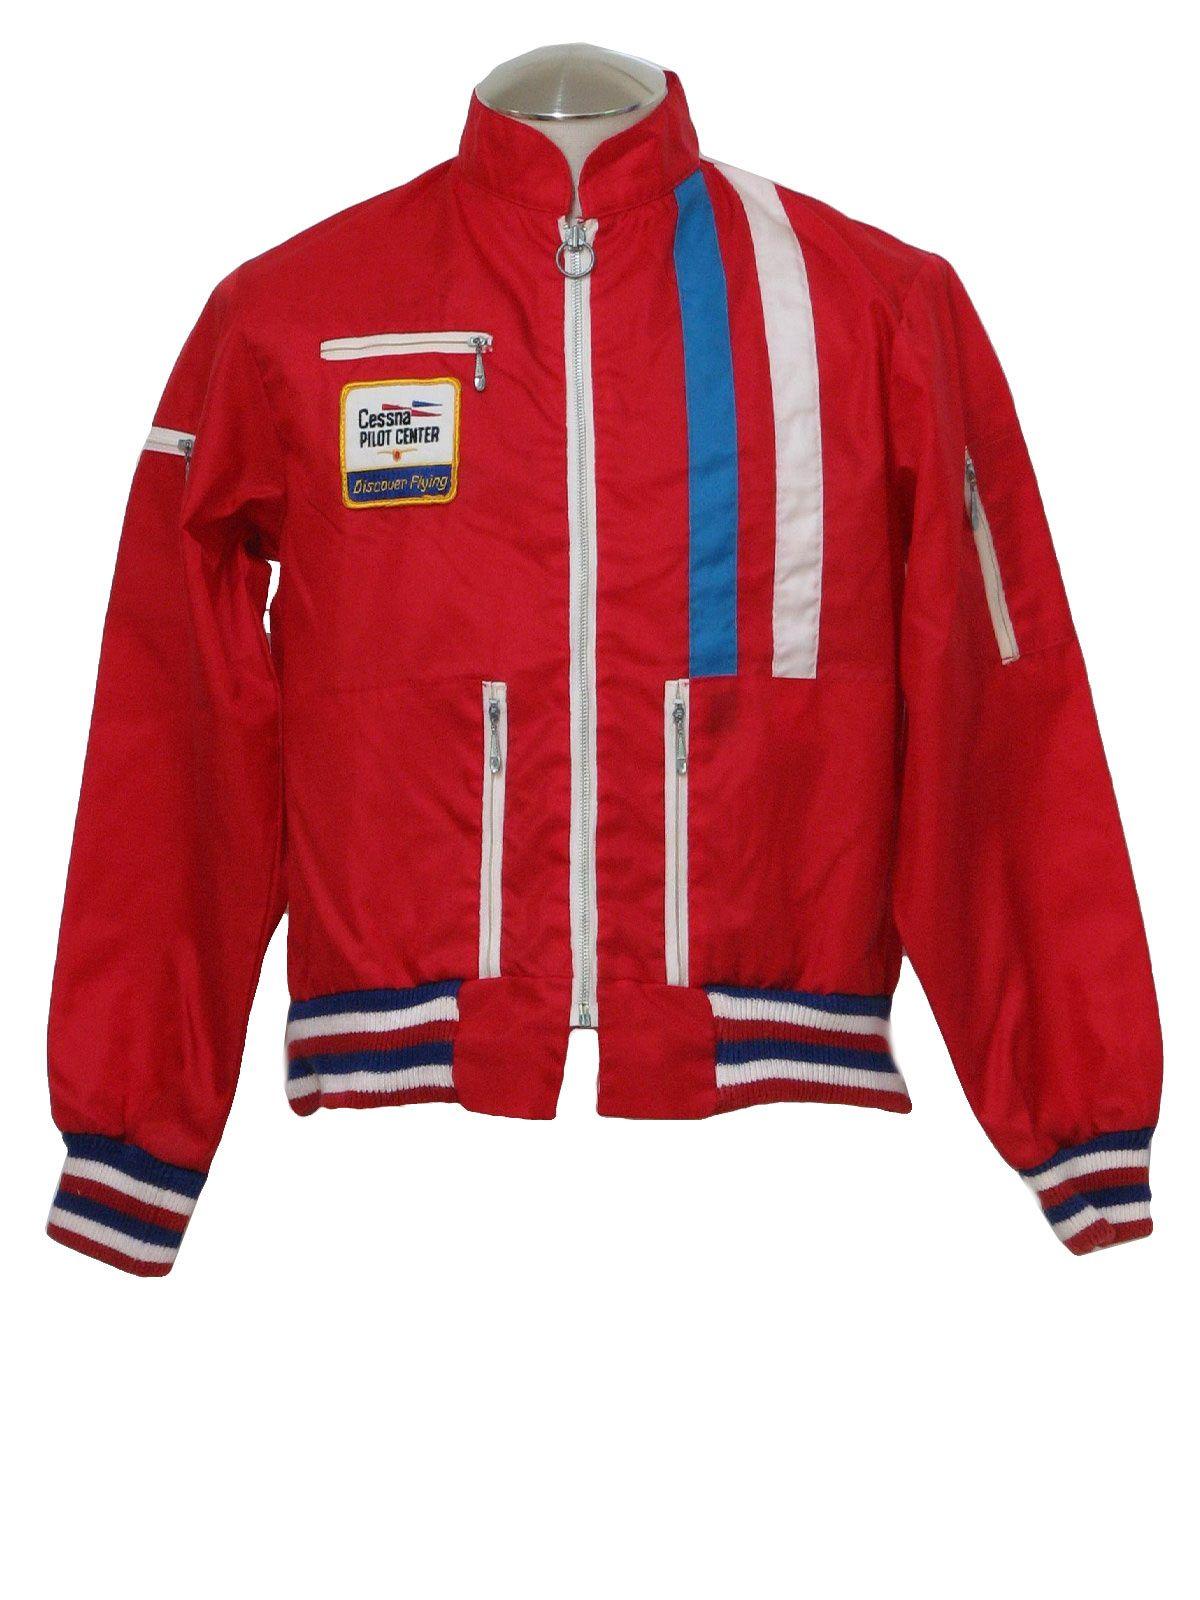 White with Red Center Logo - 70's Great Lakes Jacket Jacket: 70s -Great Lakes Jacket- Mens red ...